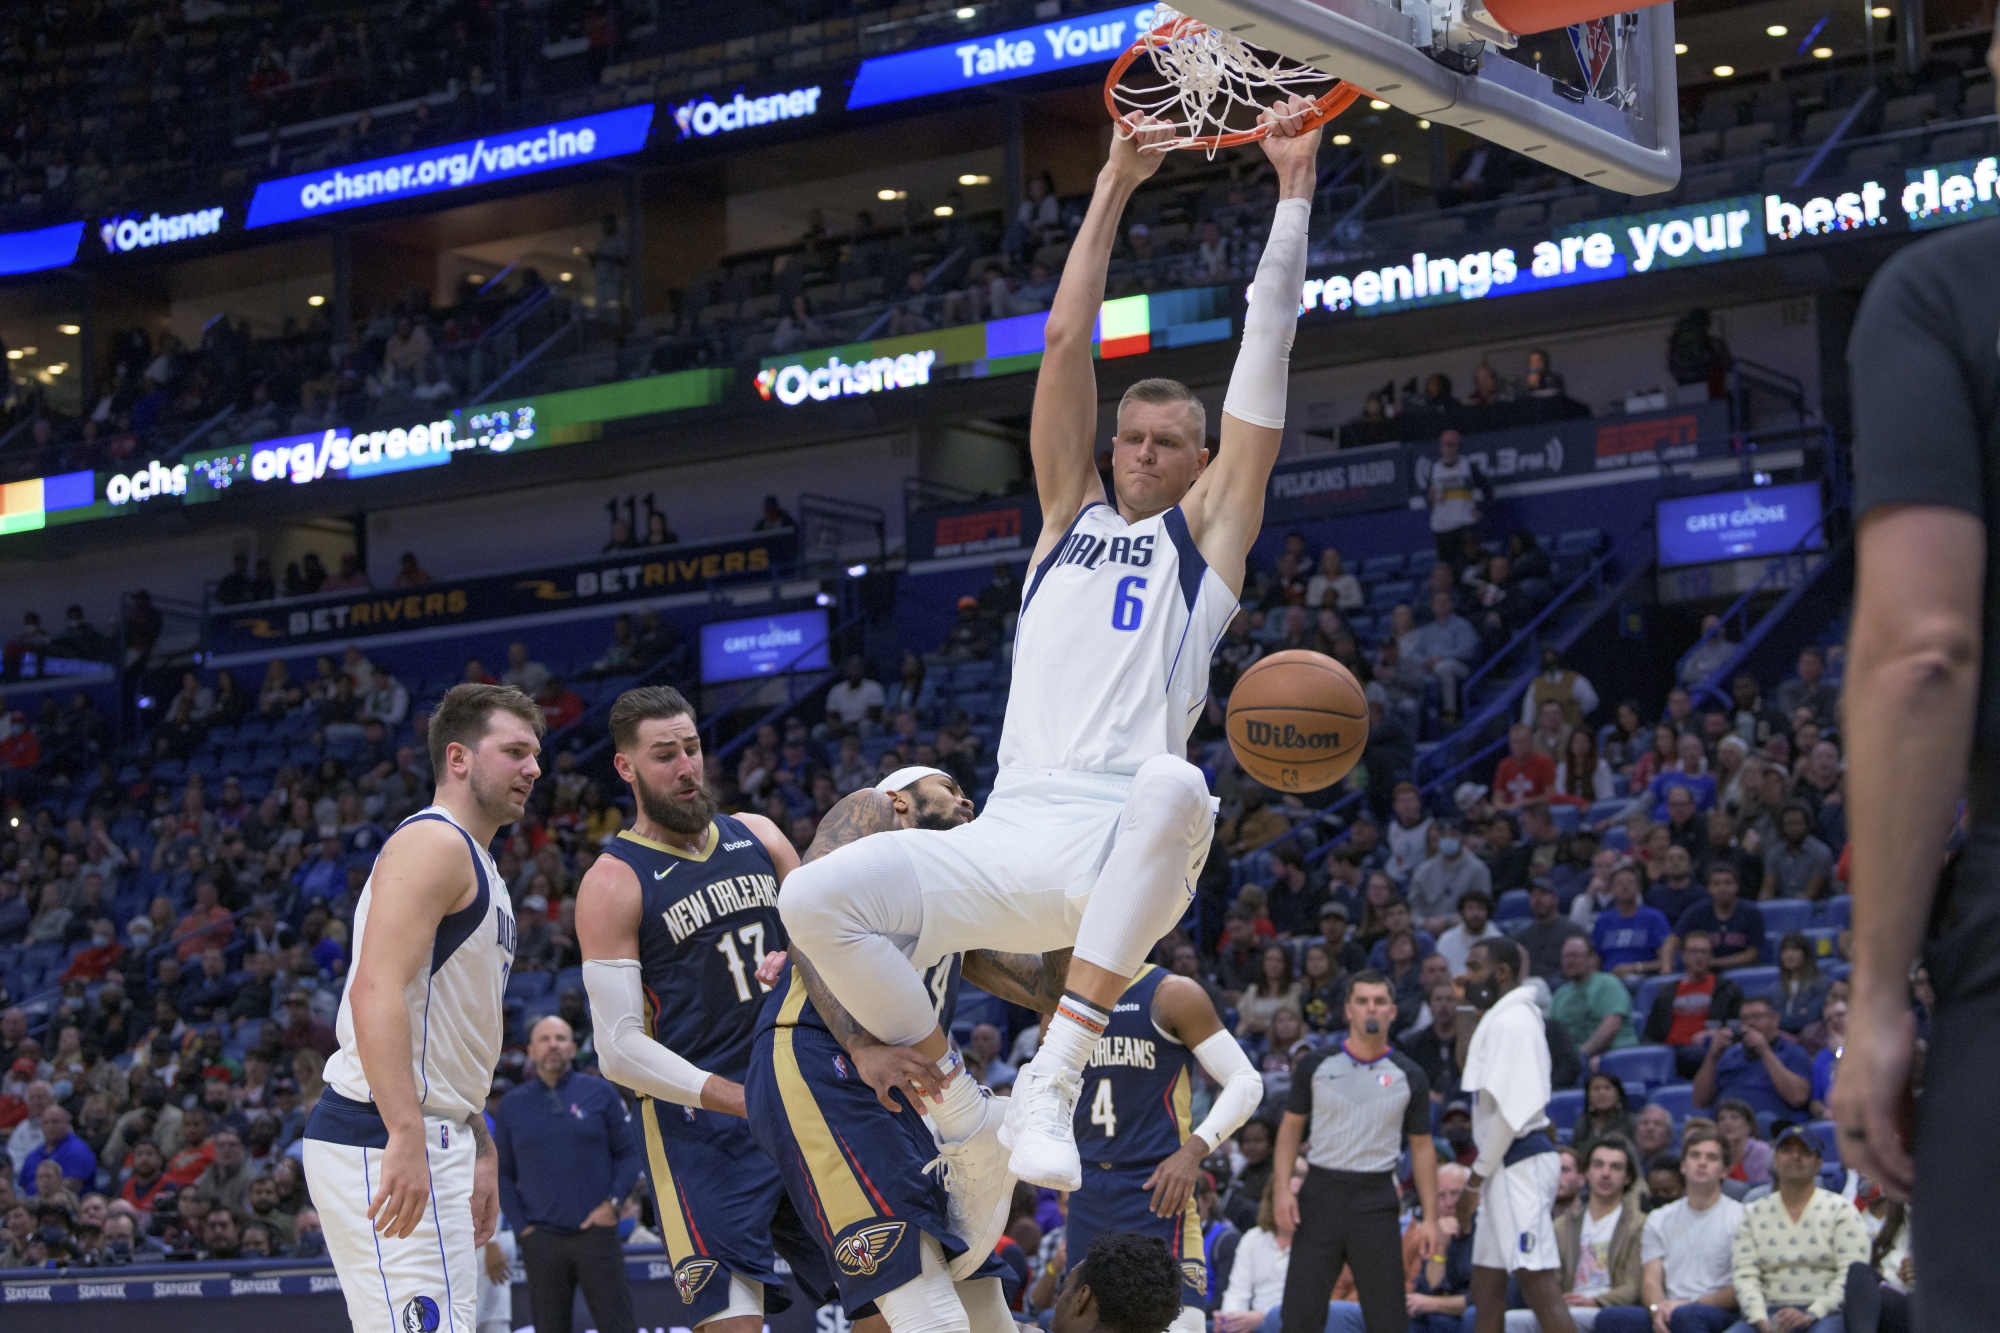 Mavericks set NBA record with 50-point halftime lead in rout - The